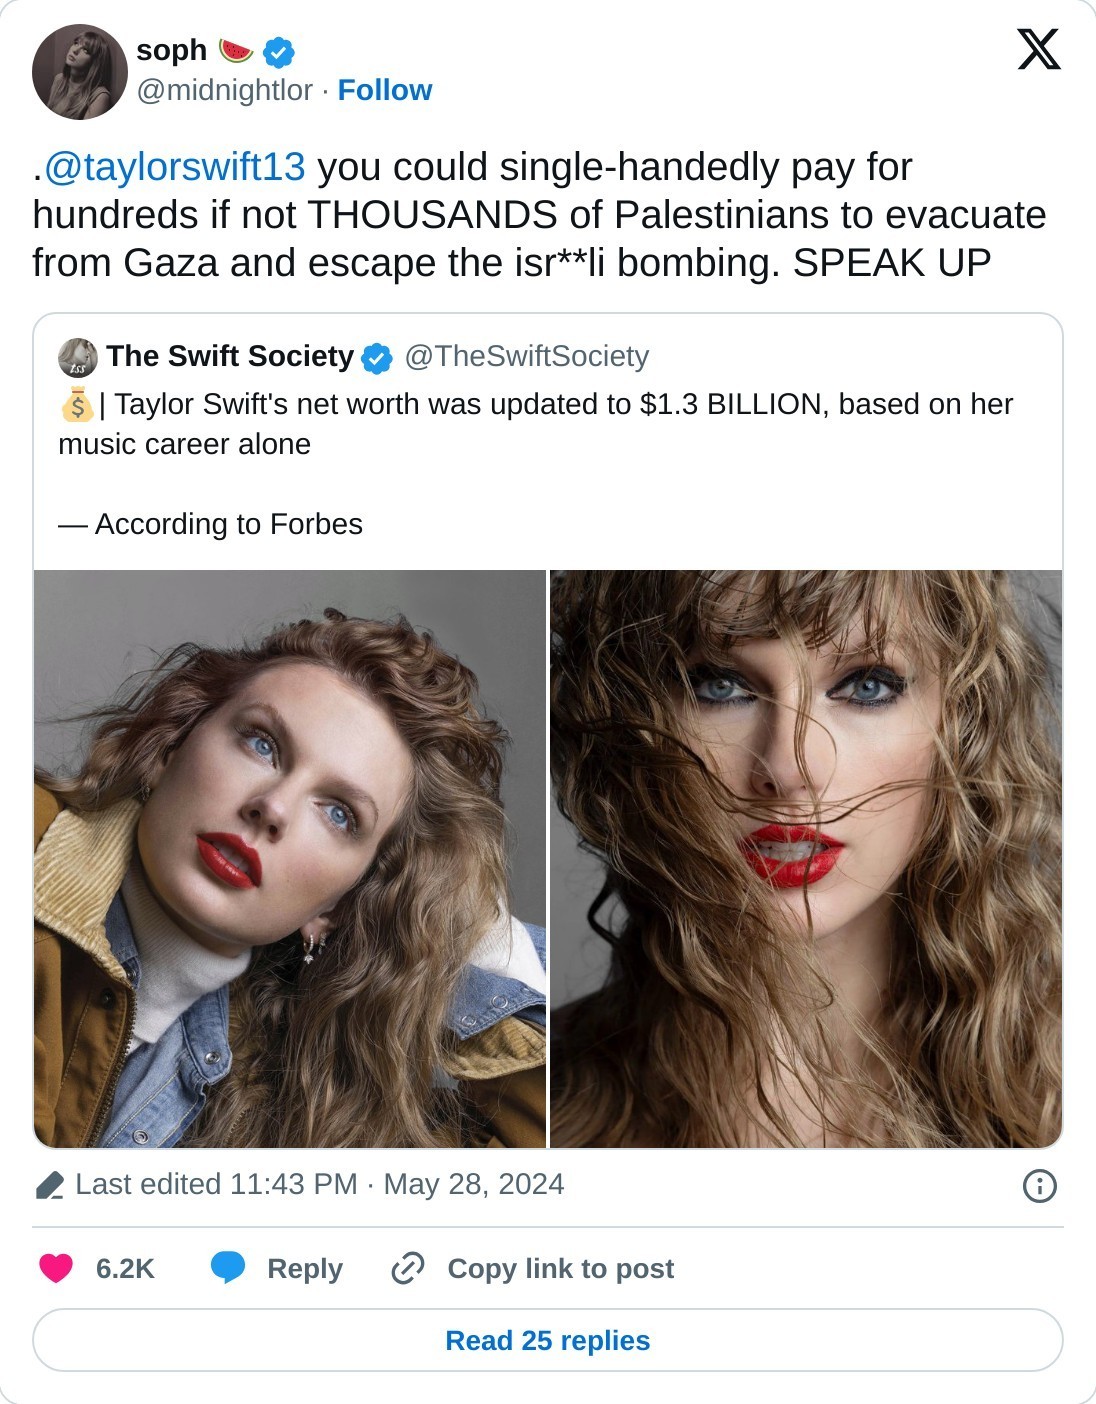 .@taylorswift13 you could single-handedly pay for hundreds if not THOUSANDS of Palestinians to evacuate from Gaza and escape the isr**li bombing. SPEAK UP https://t.co/Mm26r3GEP1  — soph 🍉 (@midnightlor) May 28, 2024